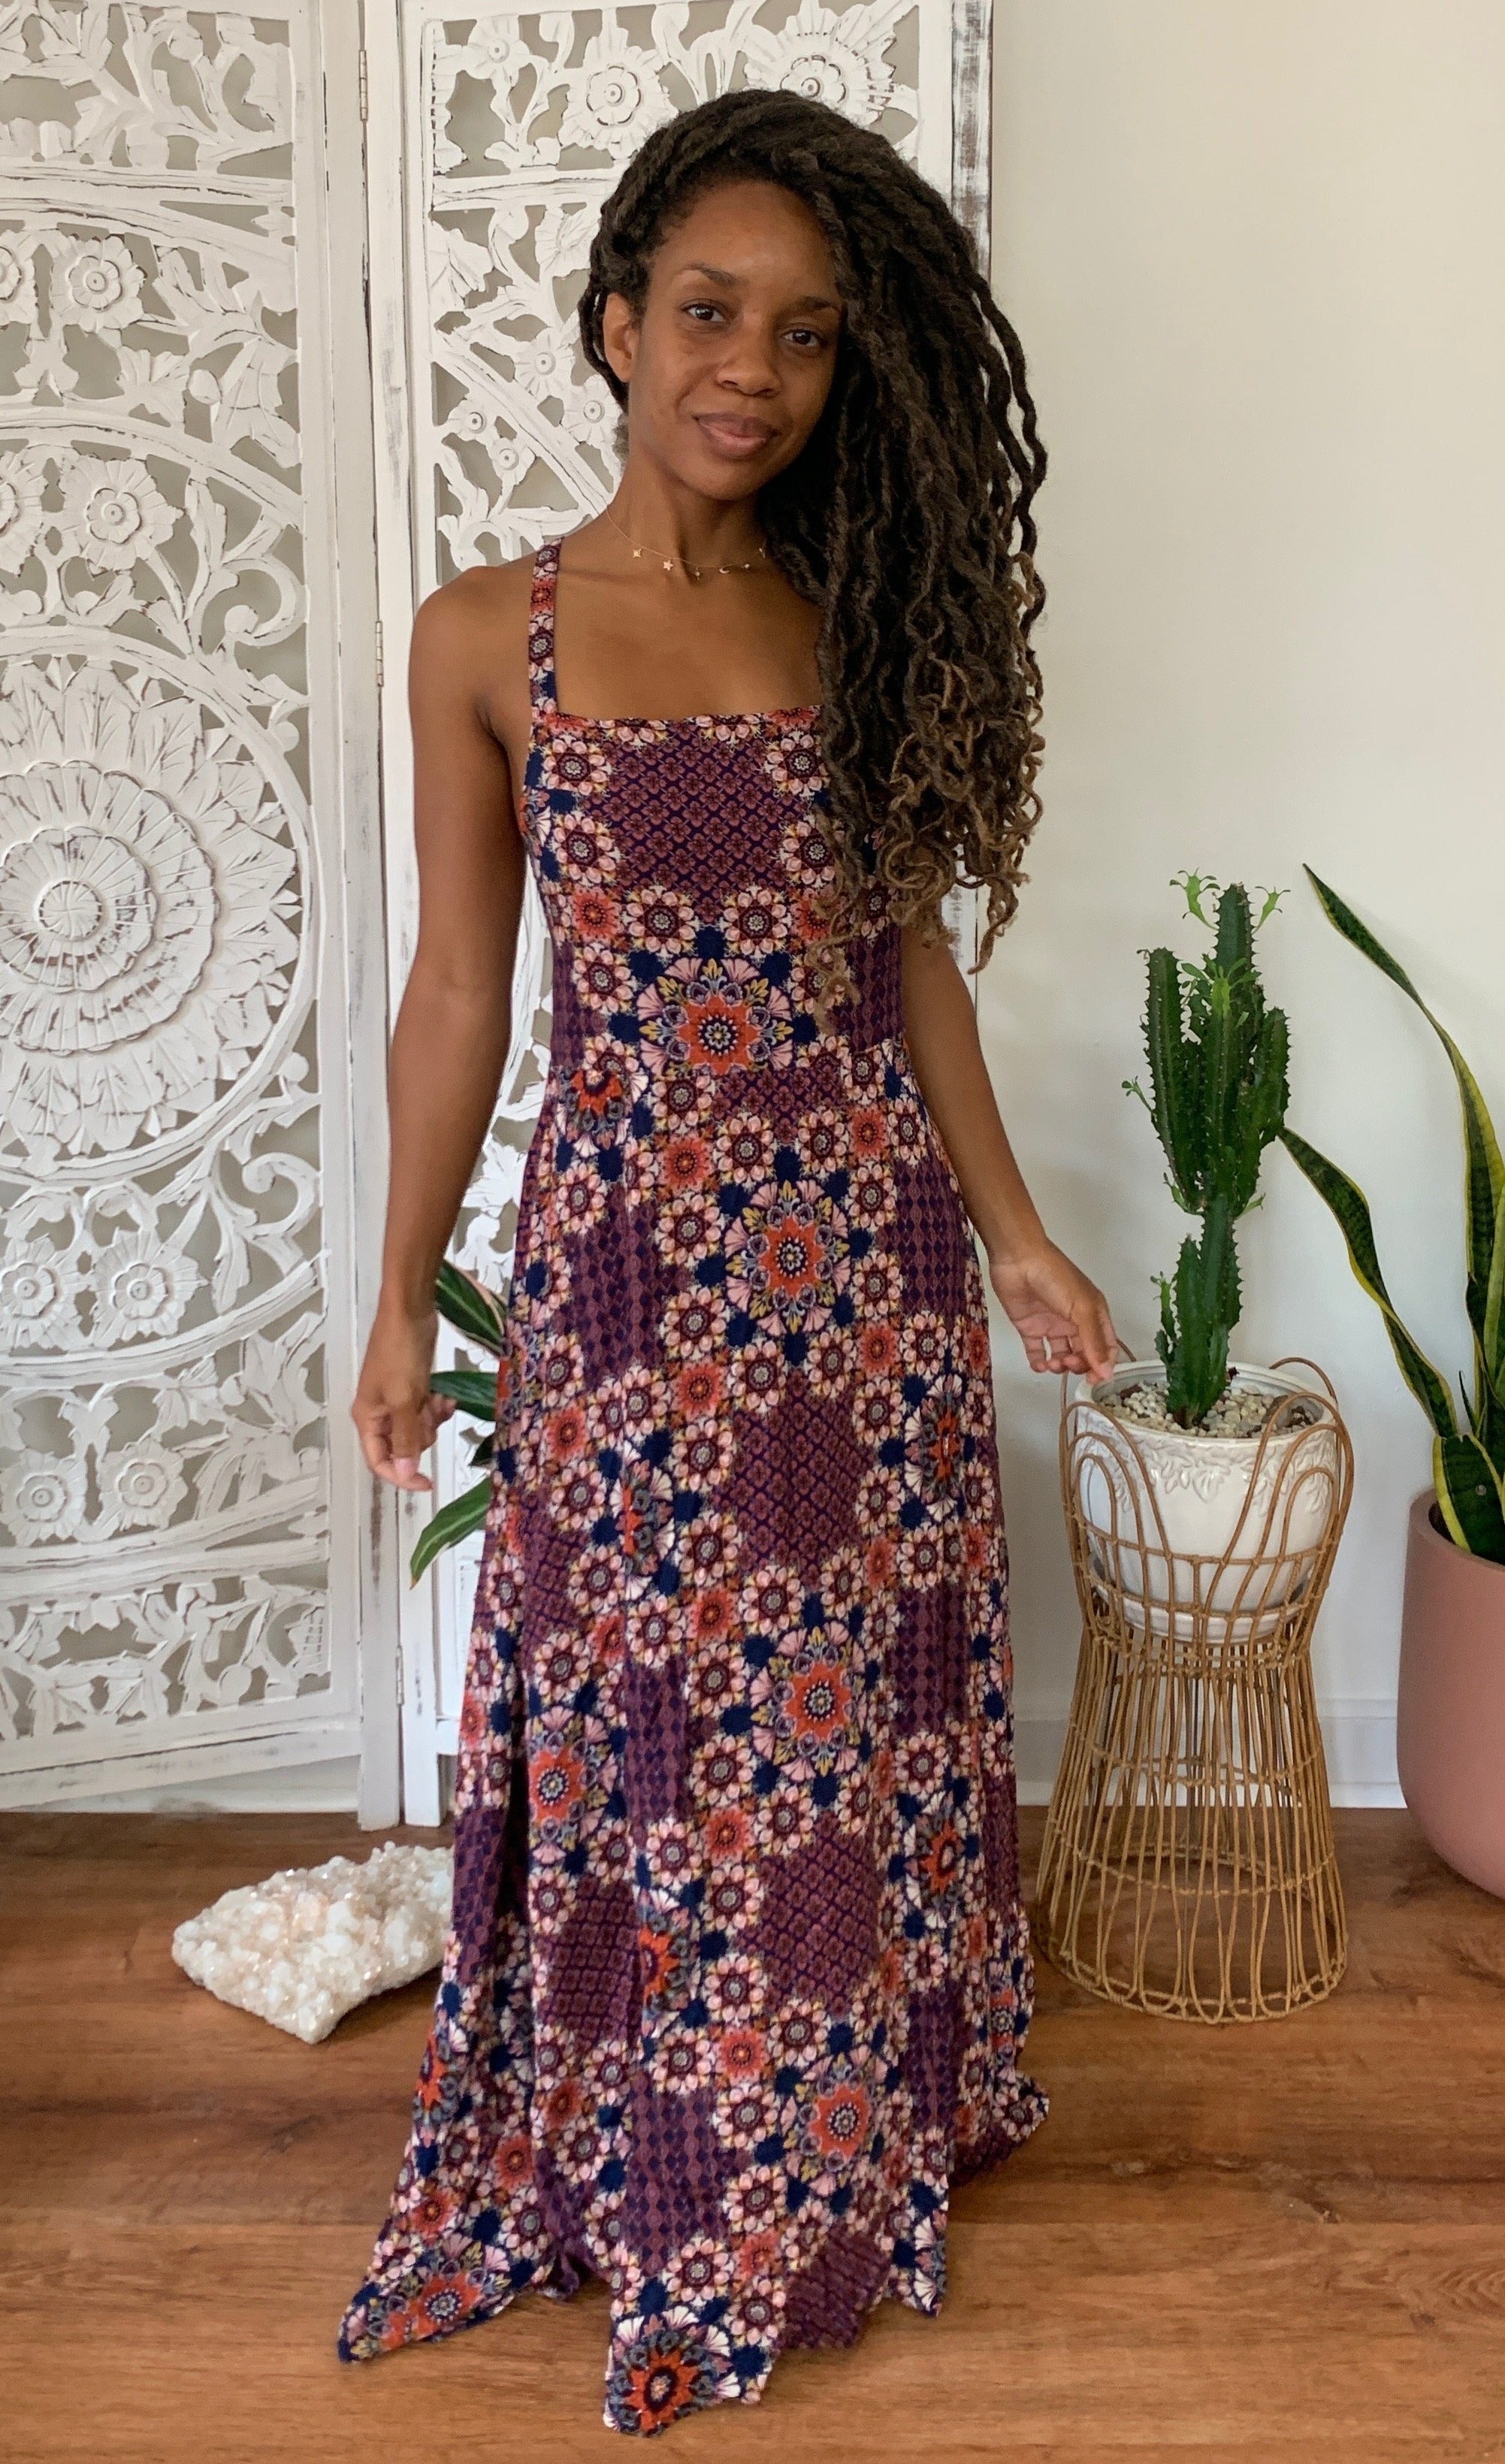 Plum Dahlia Tulum Dress - Yoga Clothing by Daughters of Culture